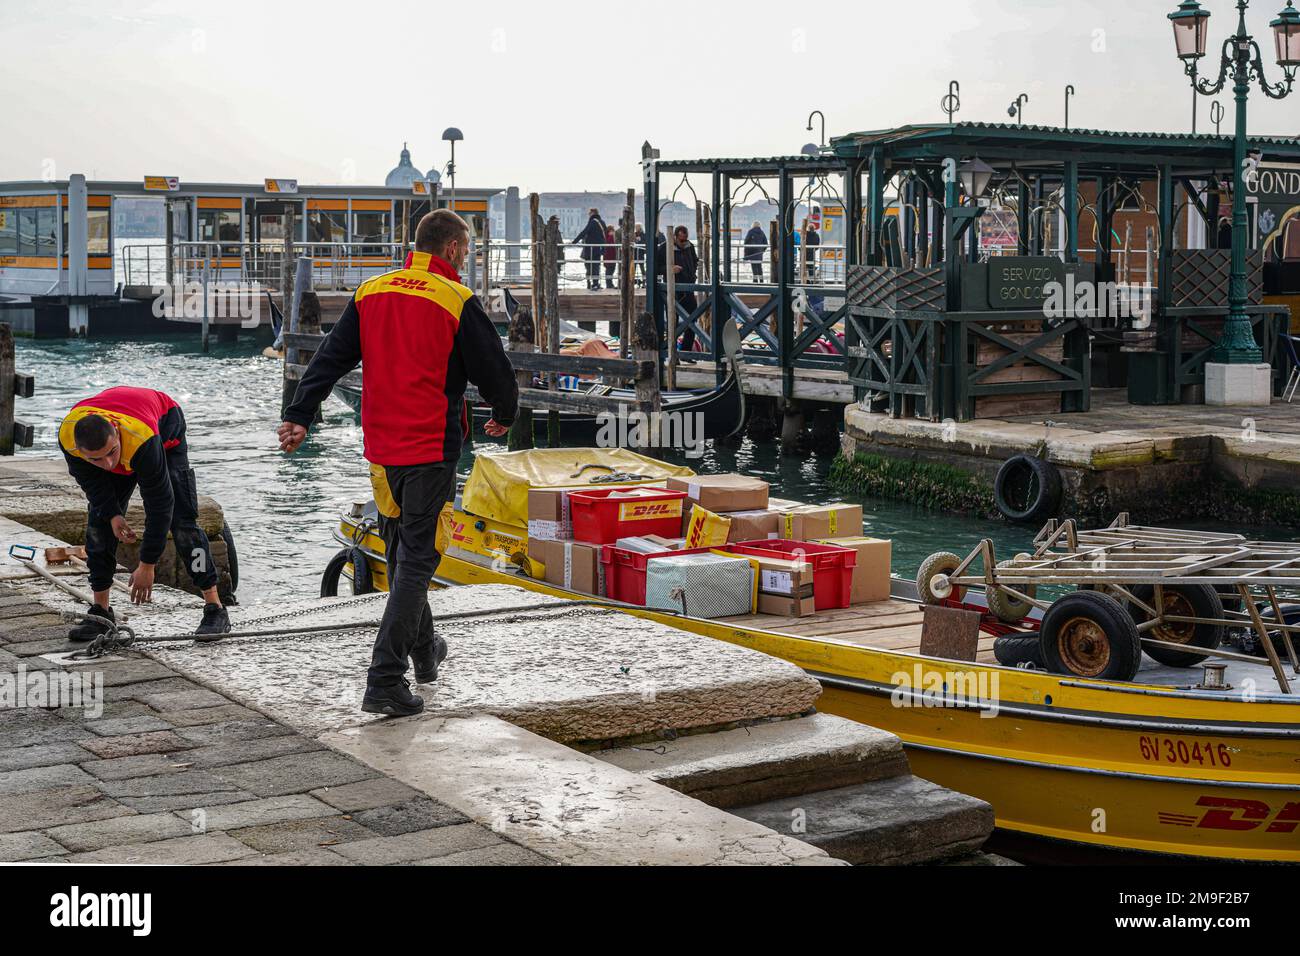 Two couriers deliver packages on a DHL boat on the Grand Canal in Venice. Stock Photo